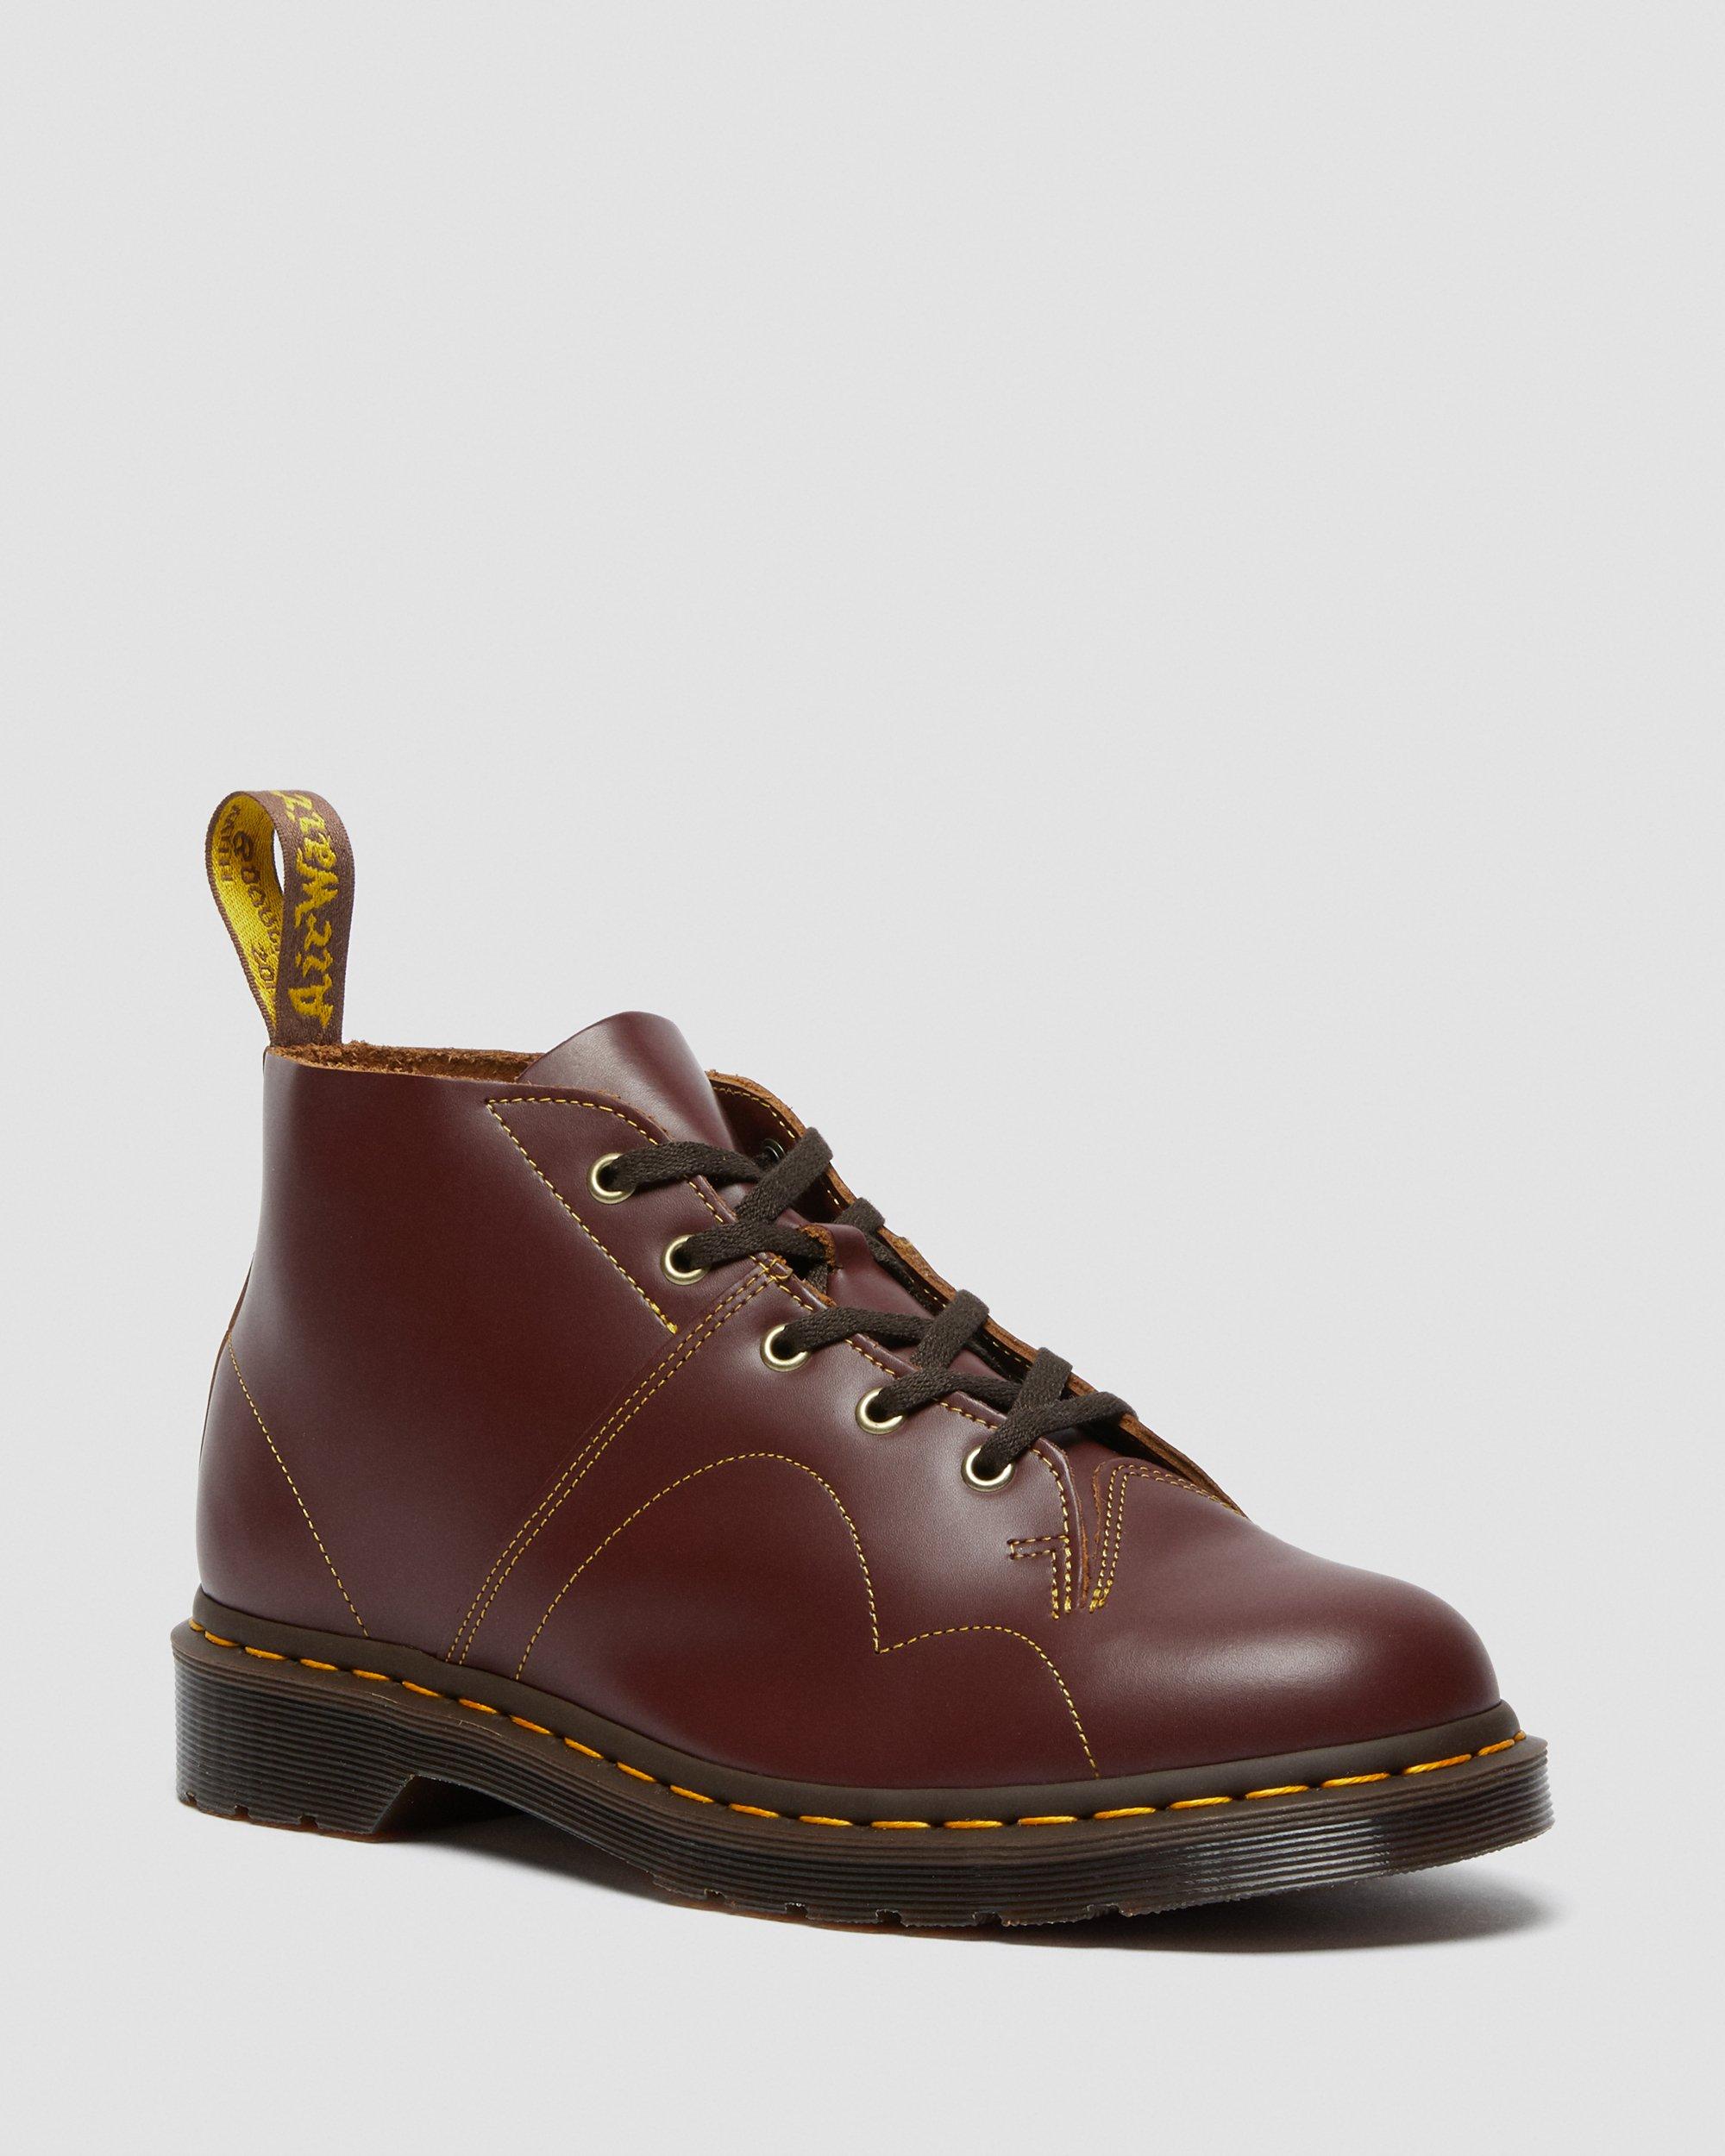 CHURCH SMOOTH LEATHER MONKEY BOOTS | Dr 